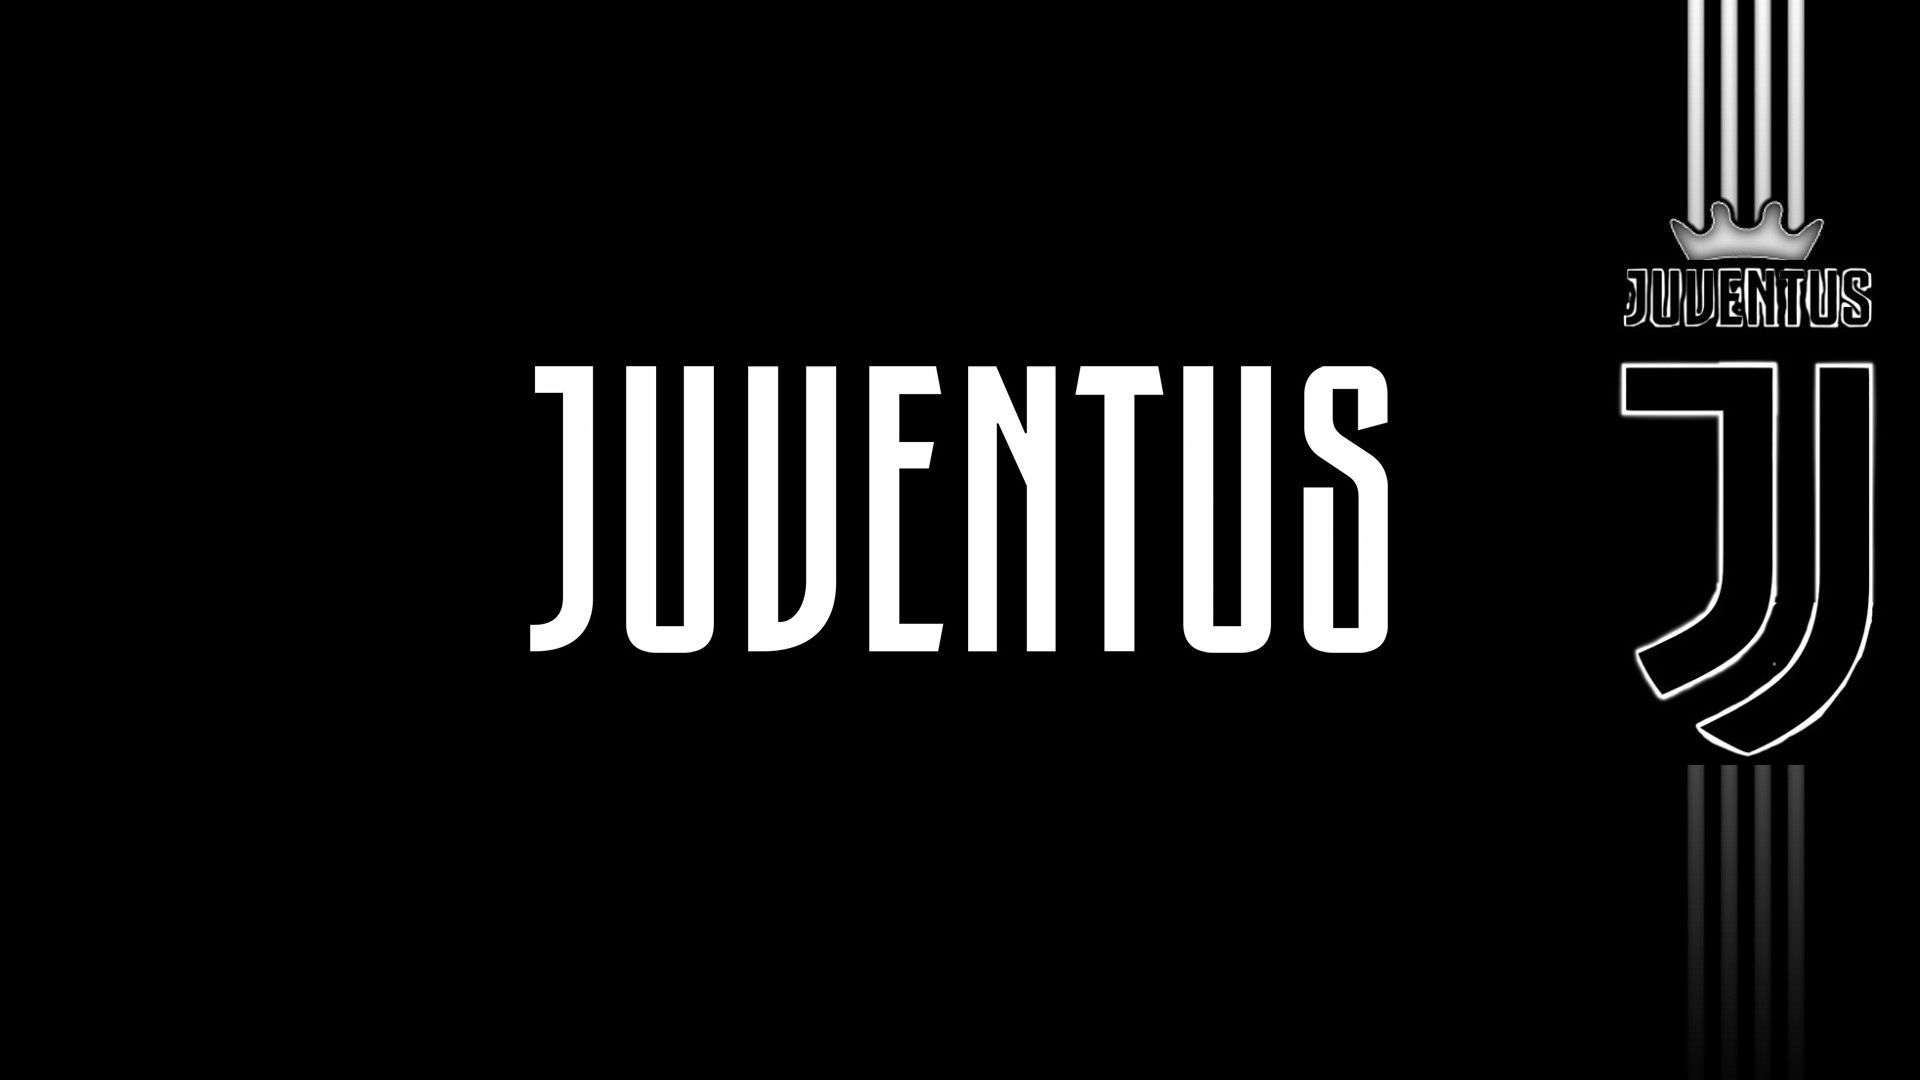 Juventus: Known as Juve, An Italian football club that plays in Serie A. 1920x1080 Full HD Background.